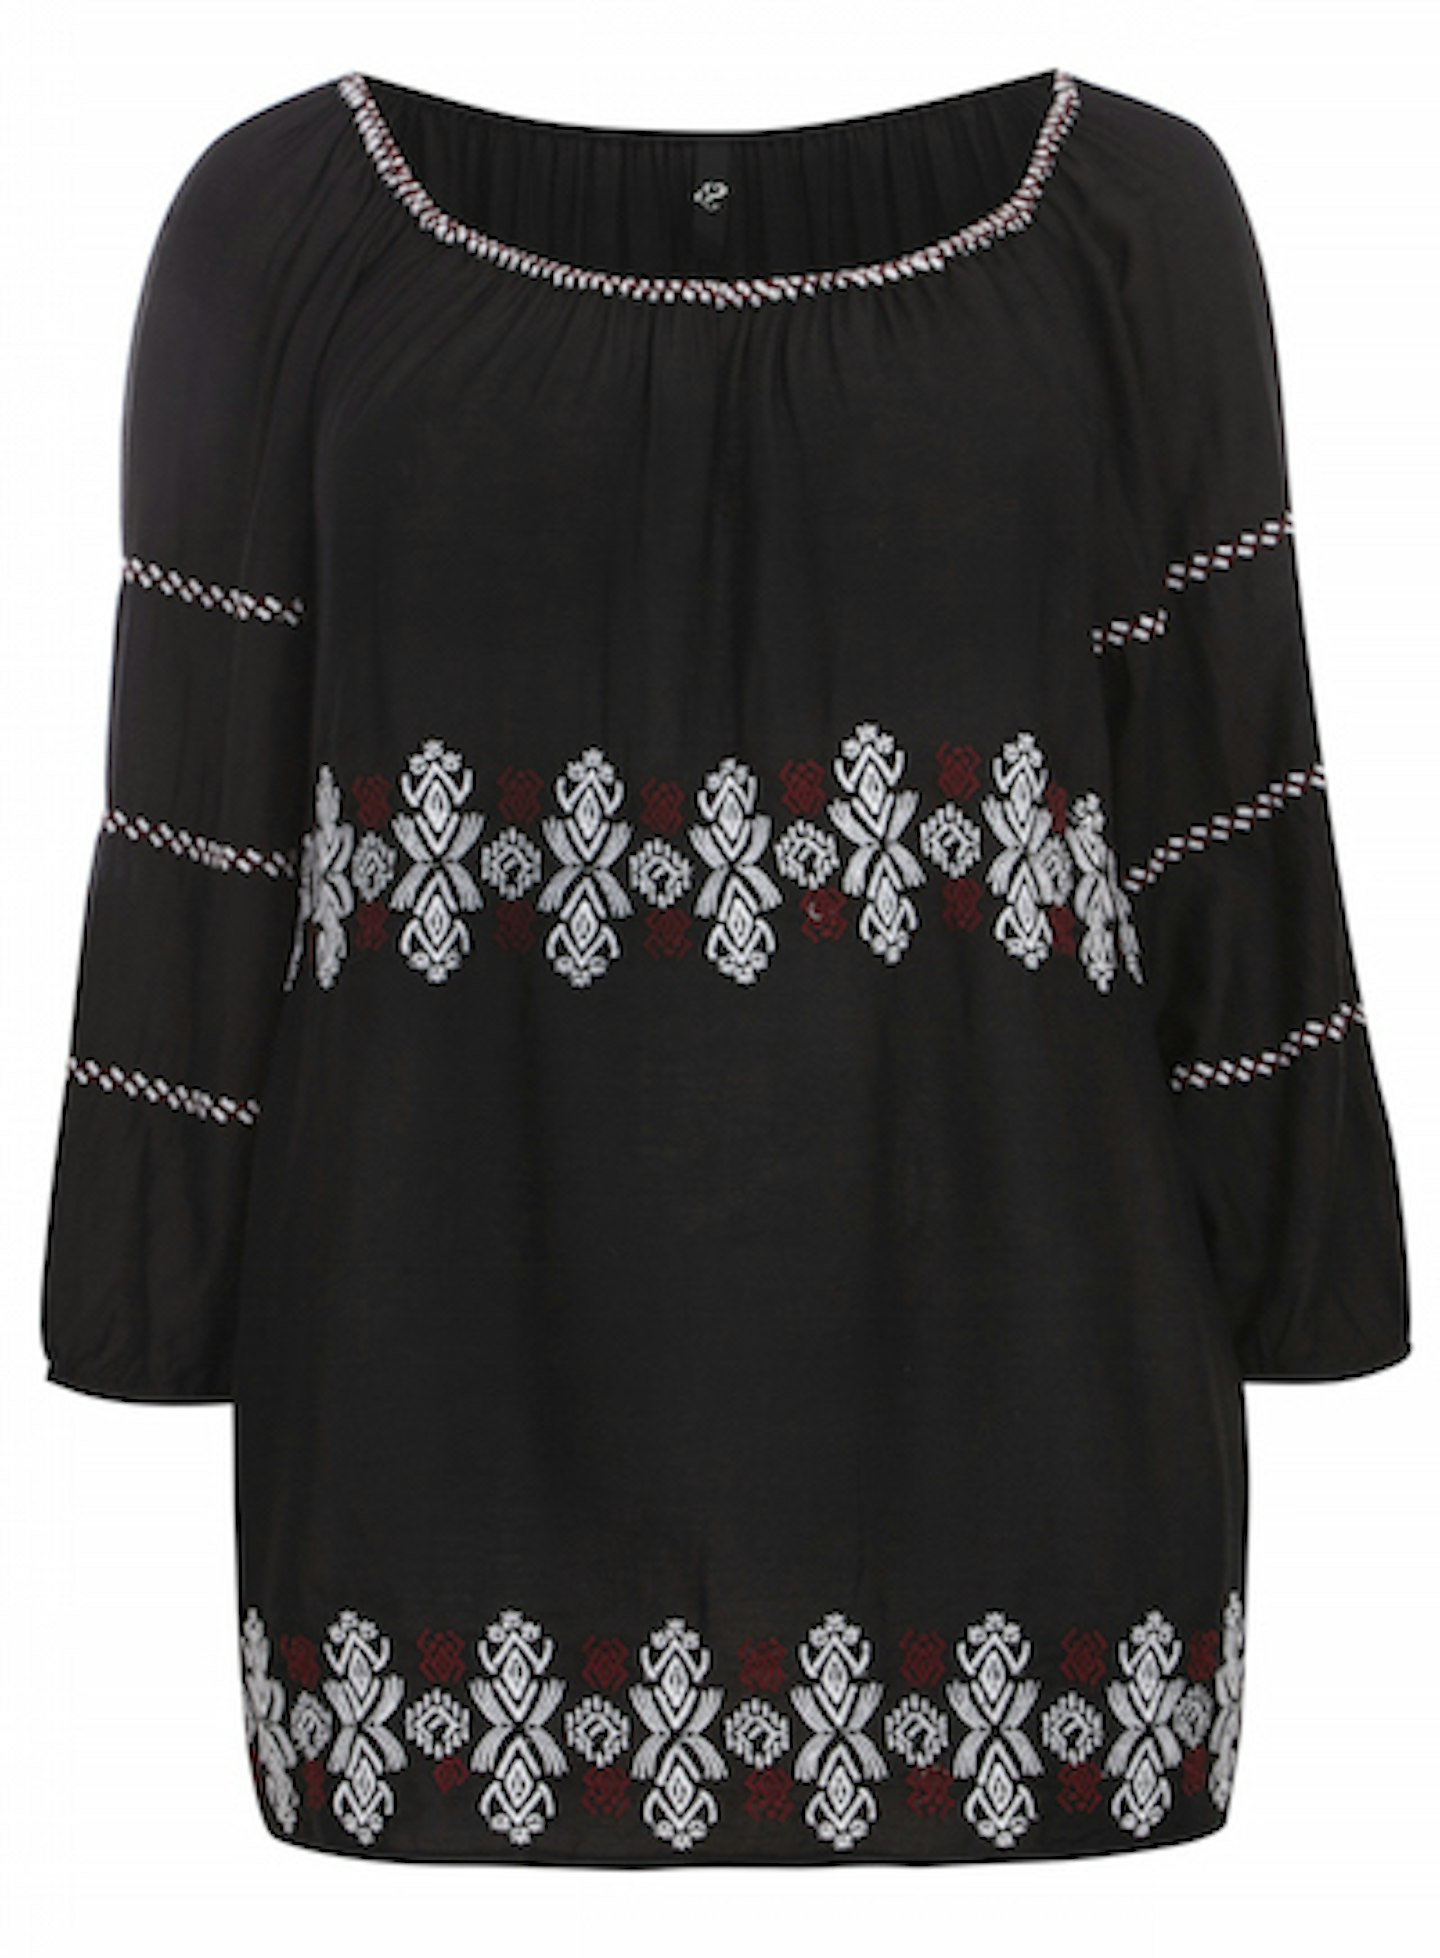 Black embroidered gypsy top 28